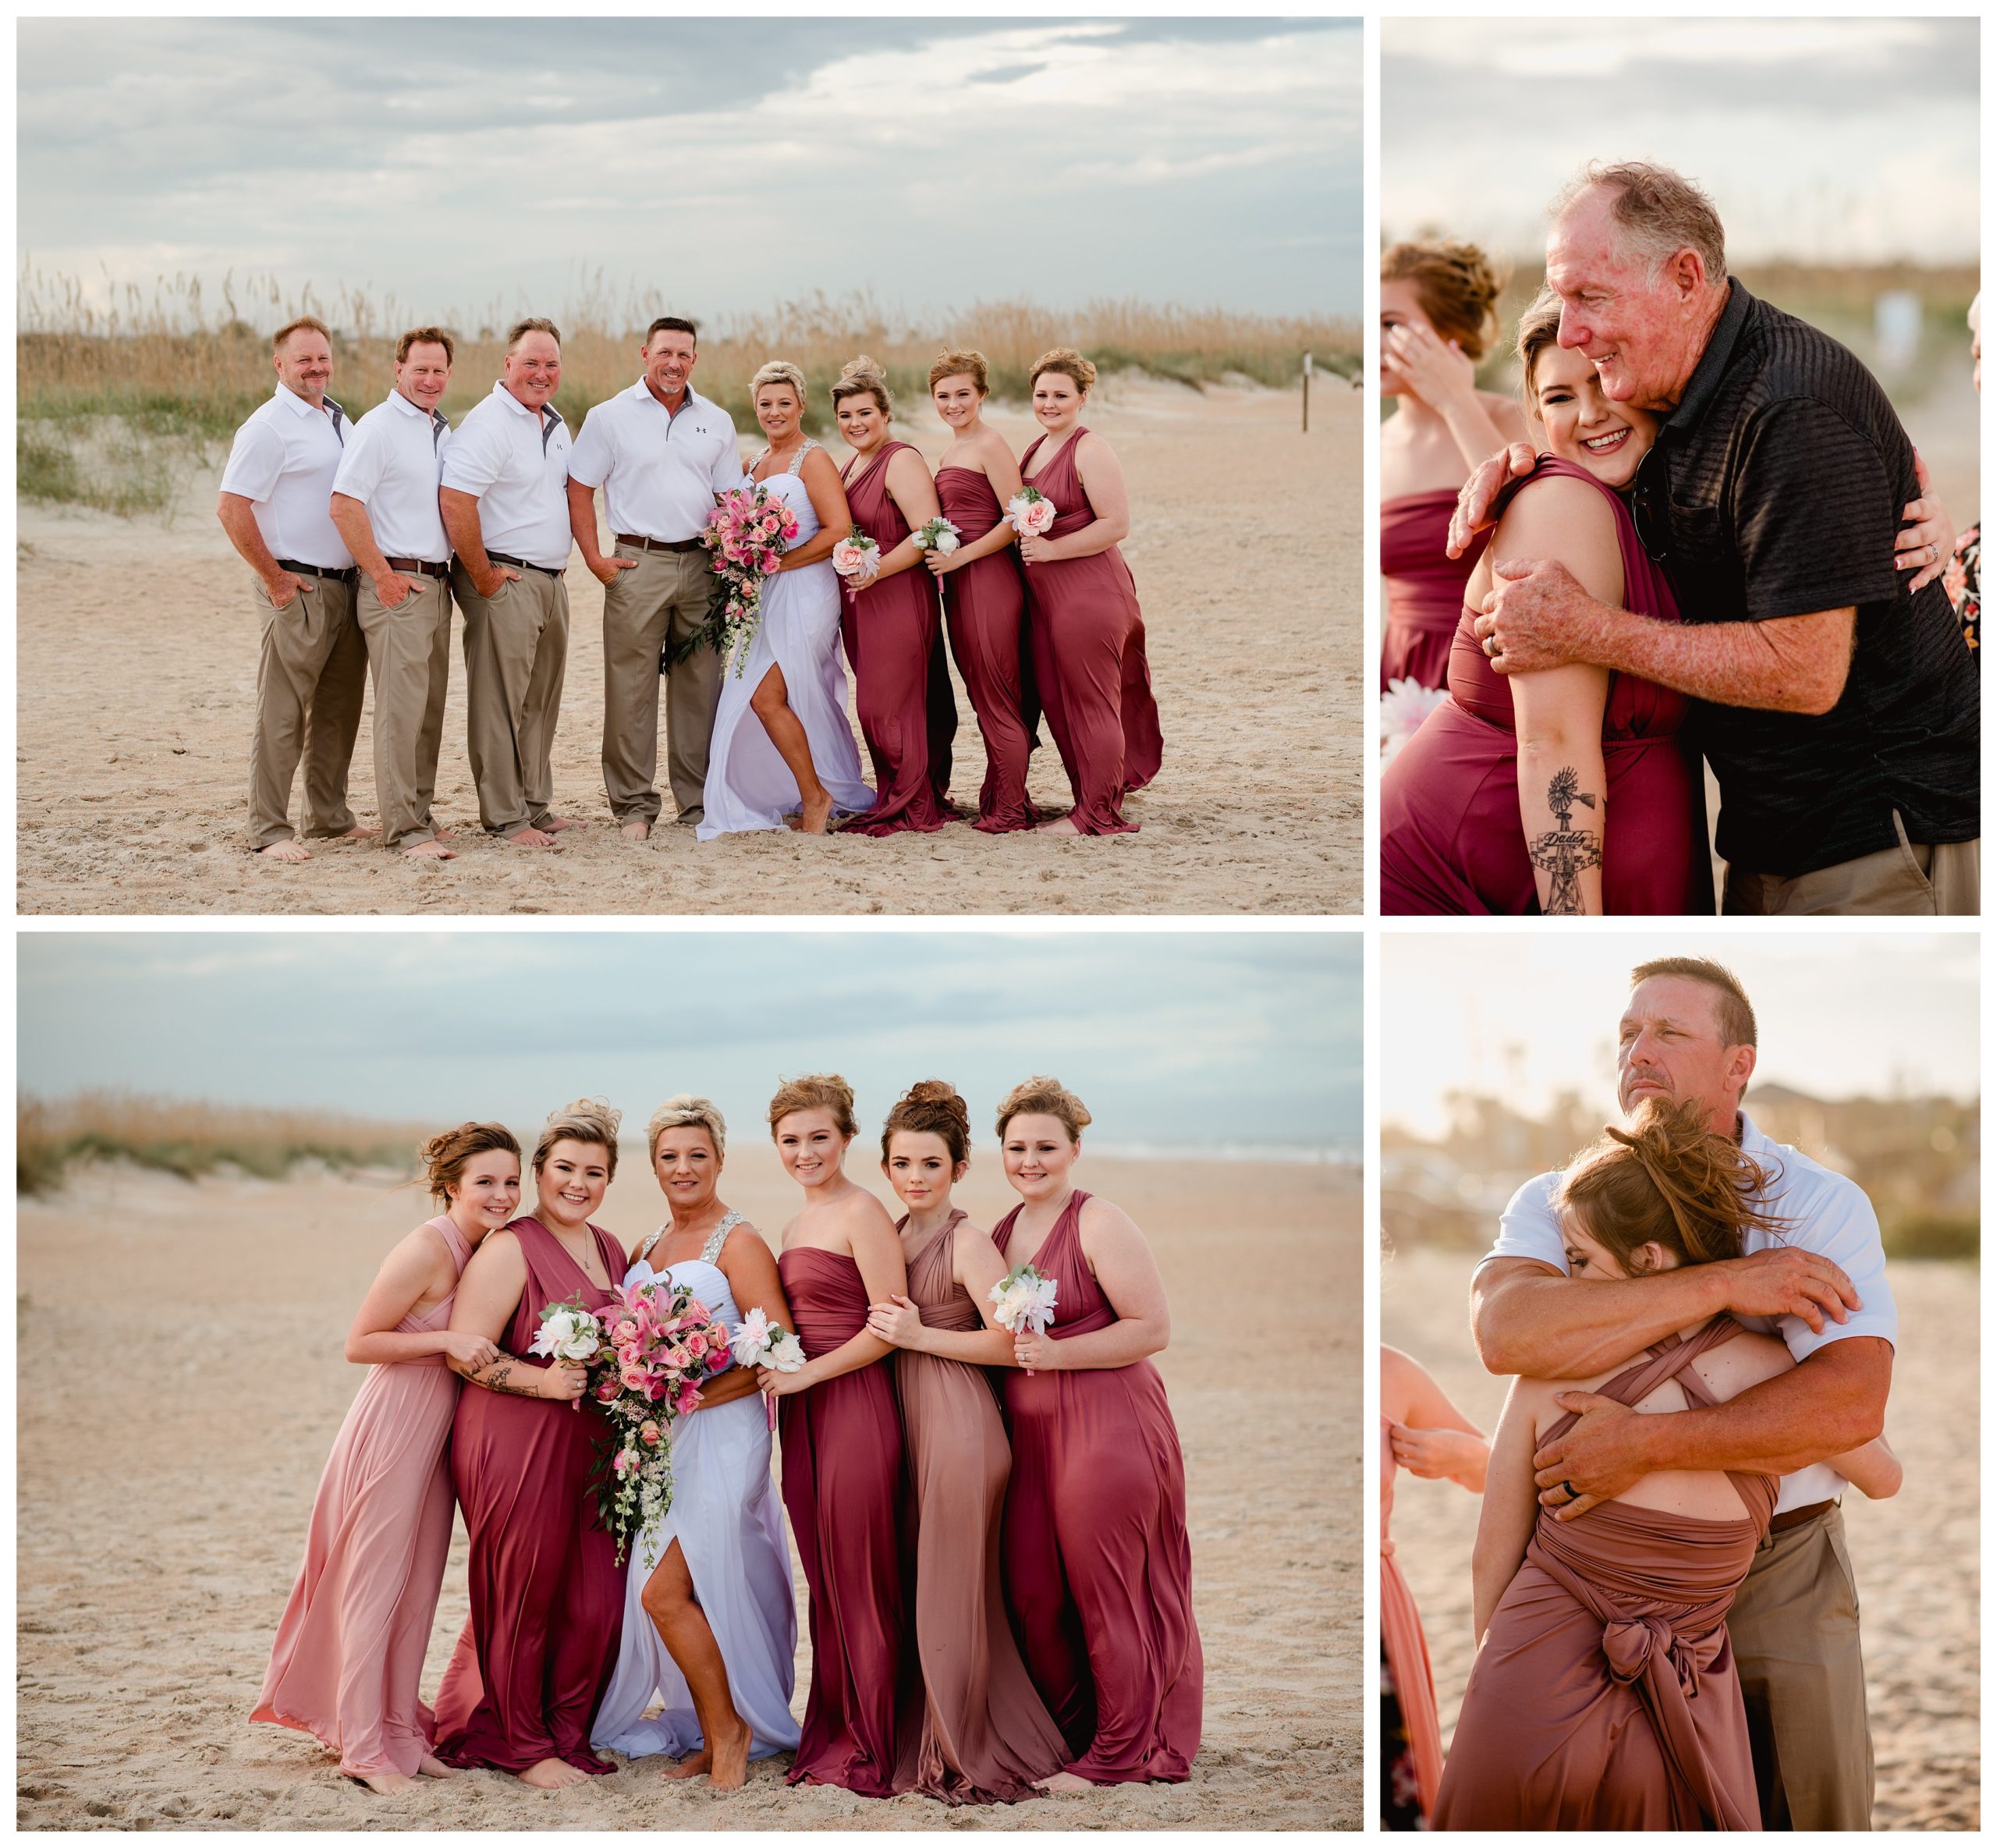 Bridal party on the beach of the wedding.